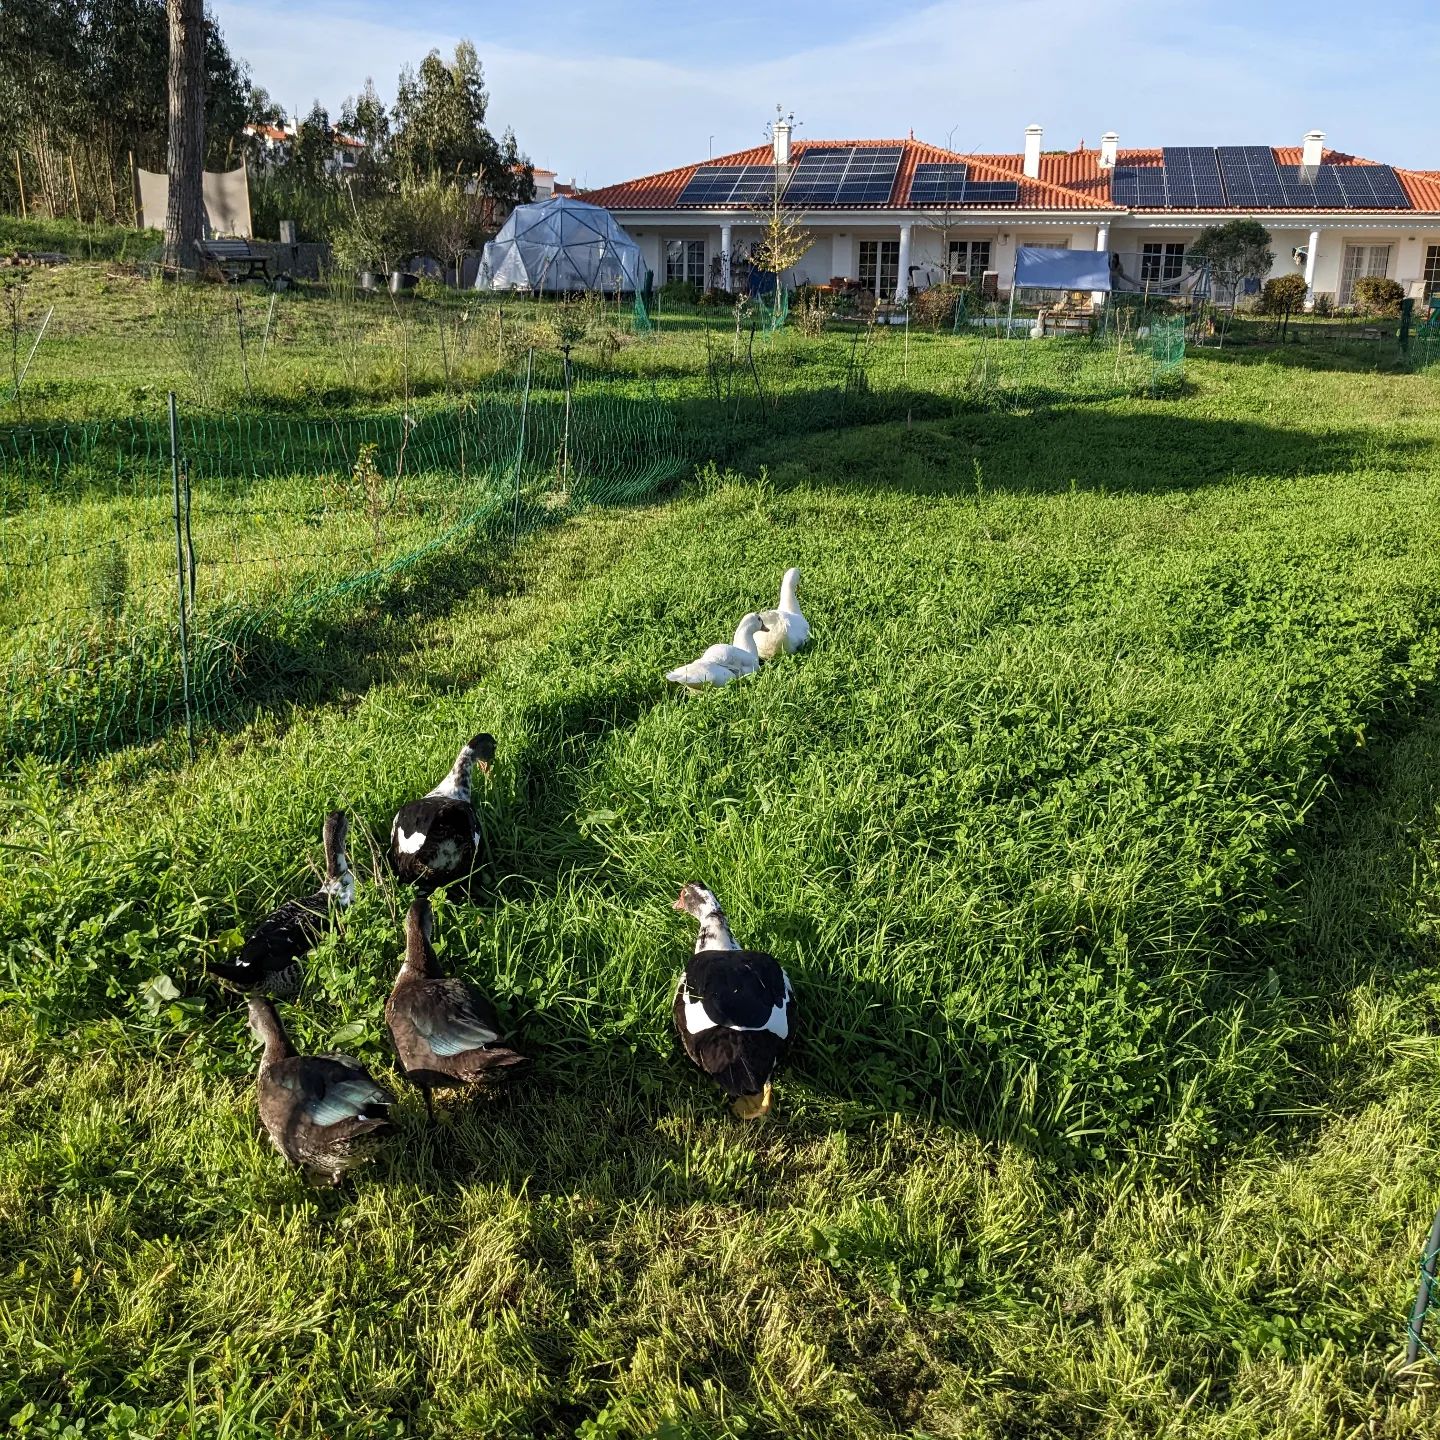 The #ducks exploring their fresh new strip of pasture